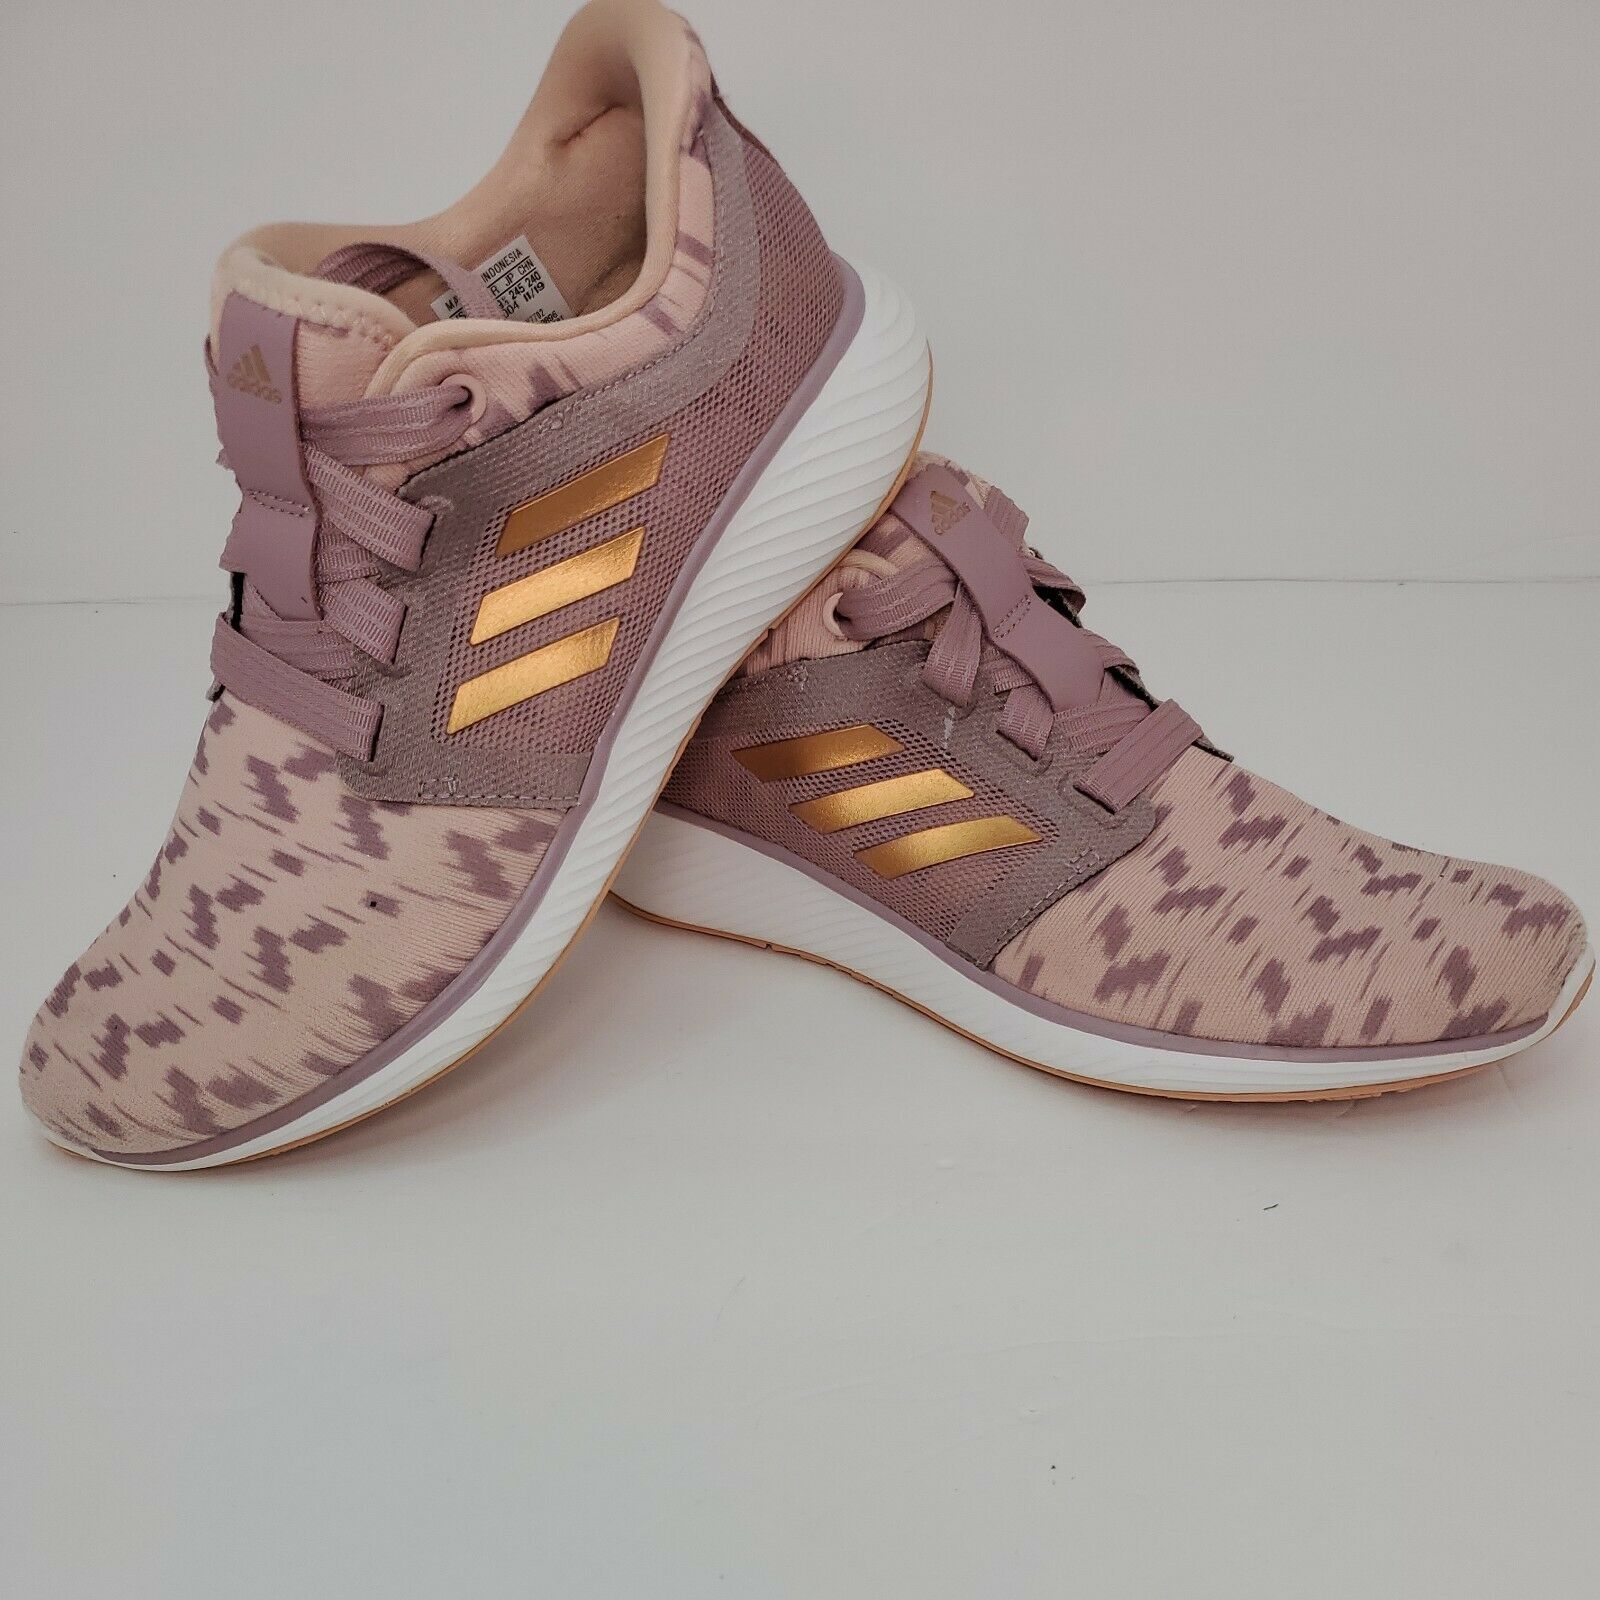 Adidas Bounce Edge Lux 3 Womens Running Sneakers Shoes ROSE GOLD PURPLE SZ 7.5